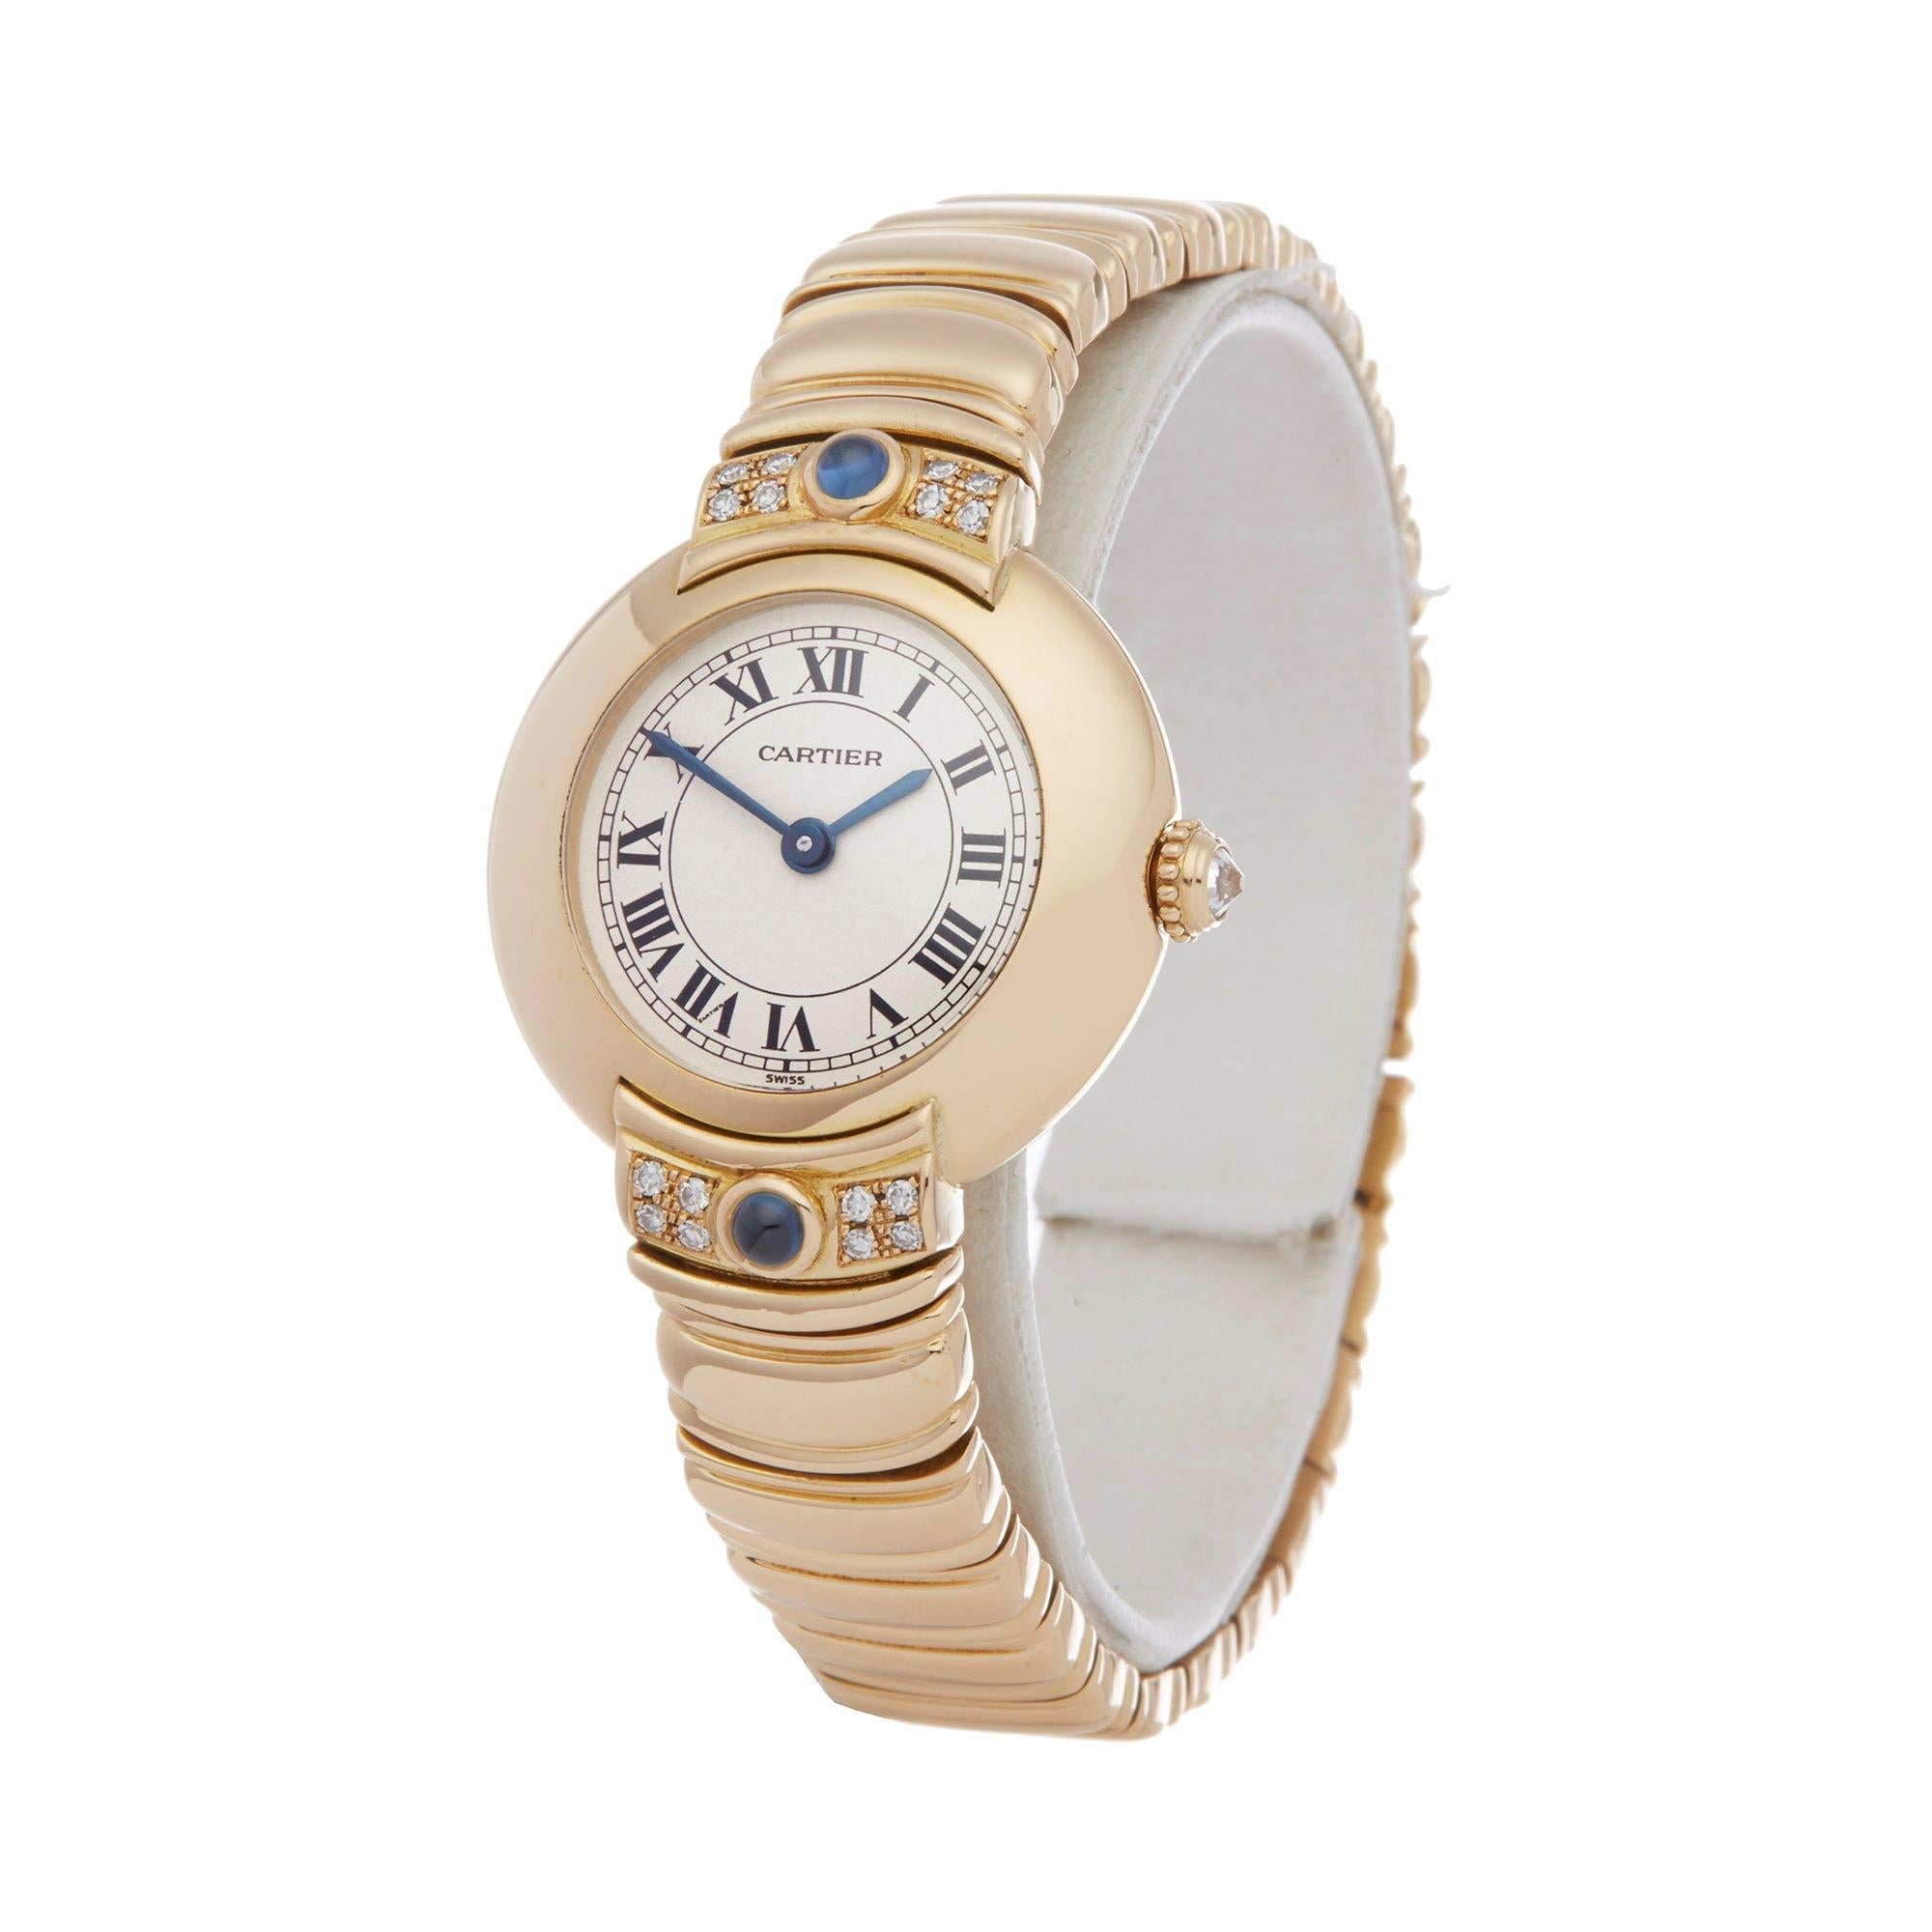 Xupes Reference: W007373
Manufacturer: Cartier
Model: Vendome
Model Variant: 
Model Number: 878999
Age: 01-10-2004
Gender: Ladies
Complete With: Cartier Box, Manuals & Guarantee
Dial: White Roman
Glass: Sapphire Crystal
Case Size: 25mm
Case